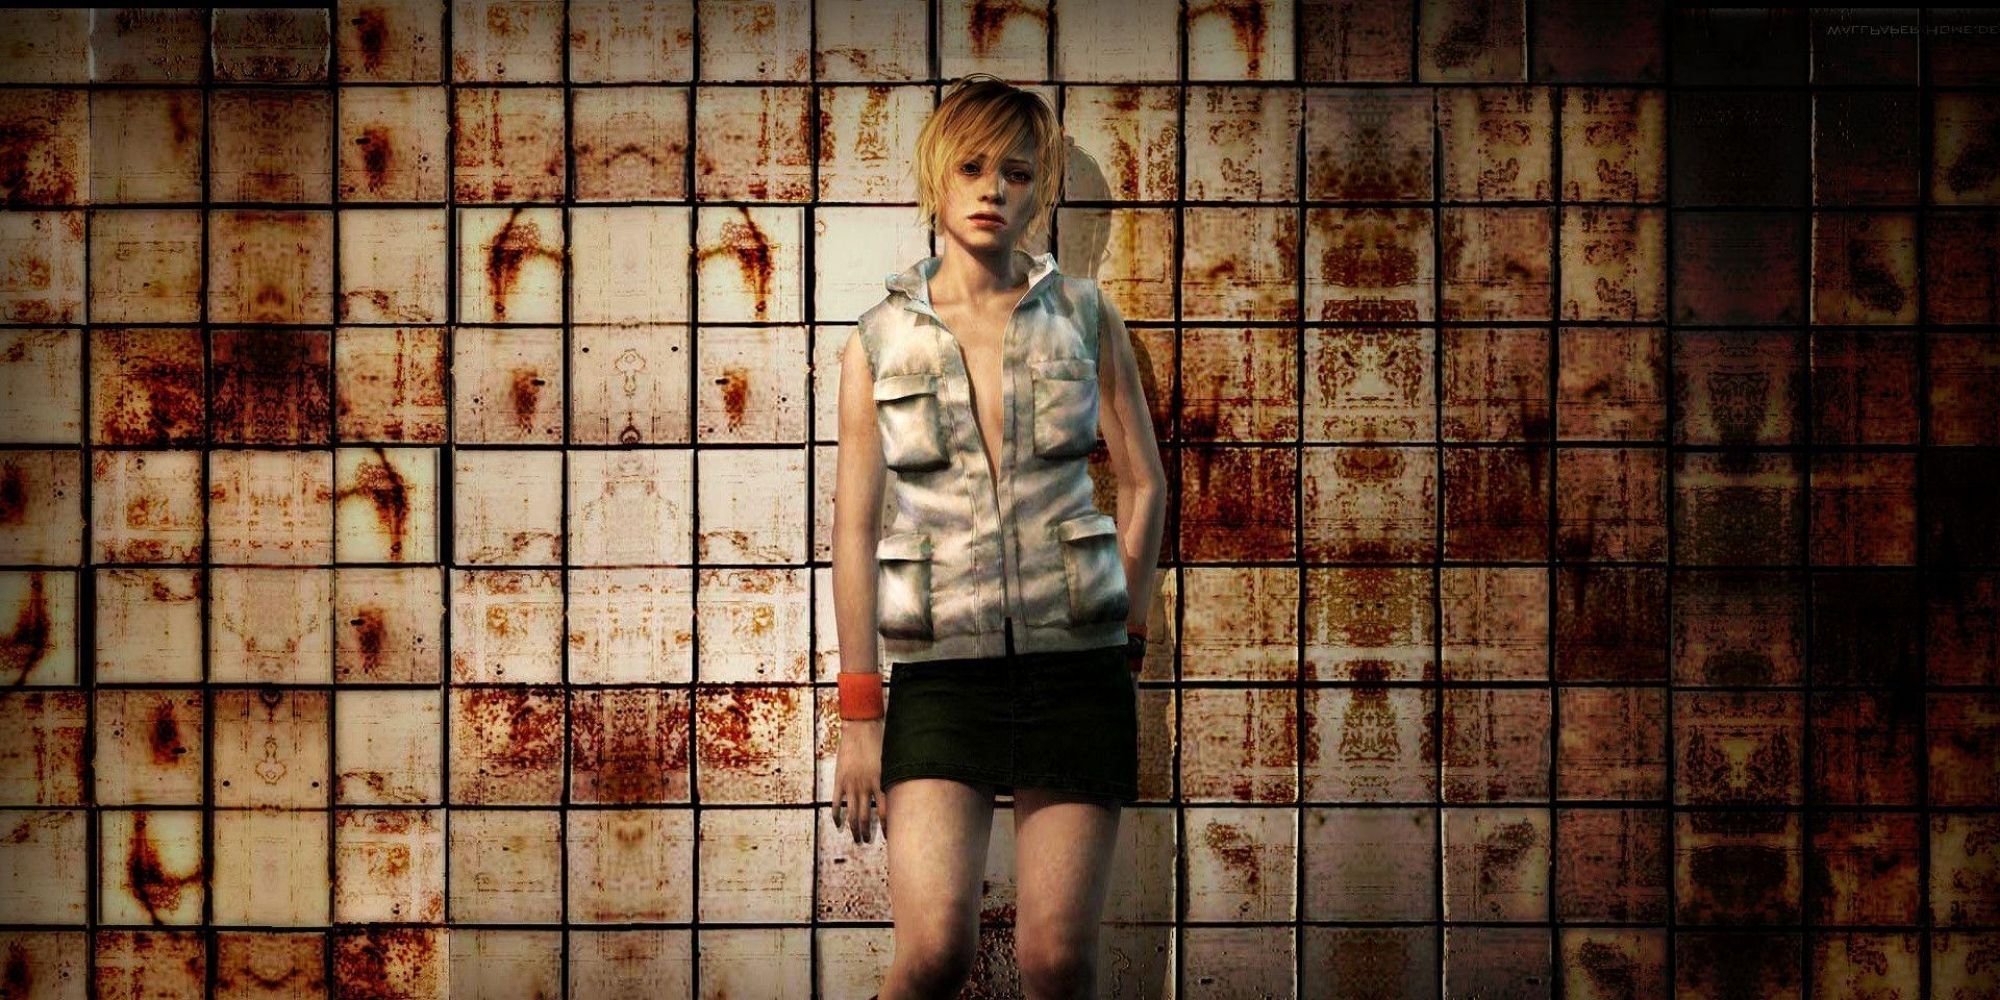 Silent Hill 2: Needs more Pyramid Head – The Mask of Reason